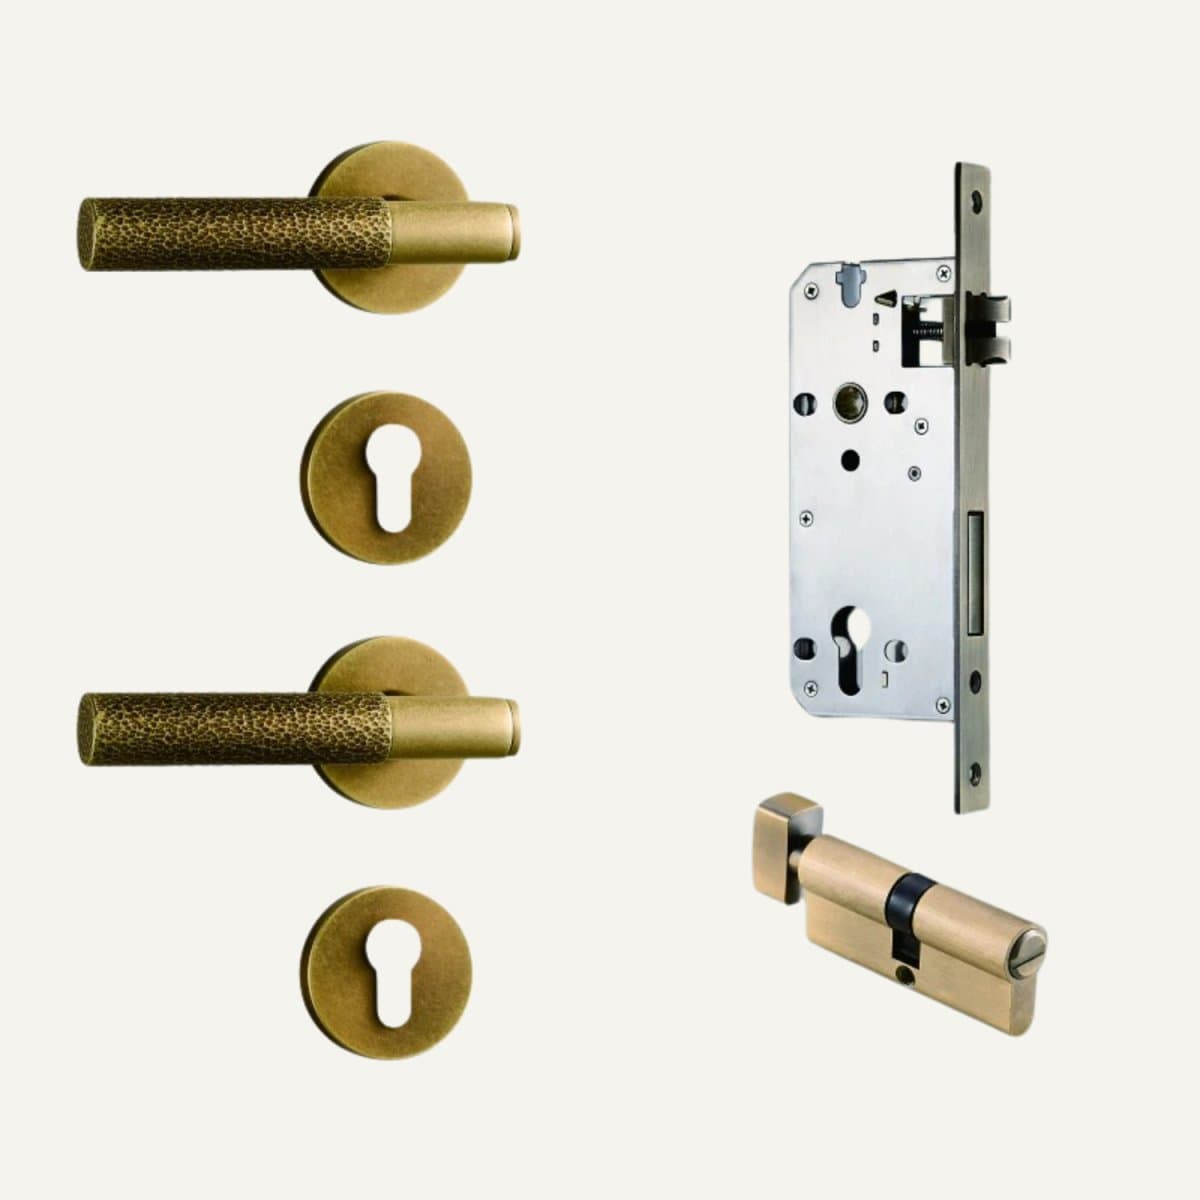 Residence Supply 2.2" x 5.3" / 5.5 x 13.5cm / With Thumb Lock / Antique Brass Asper Handle and Lock